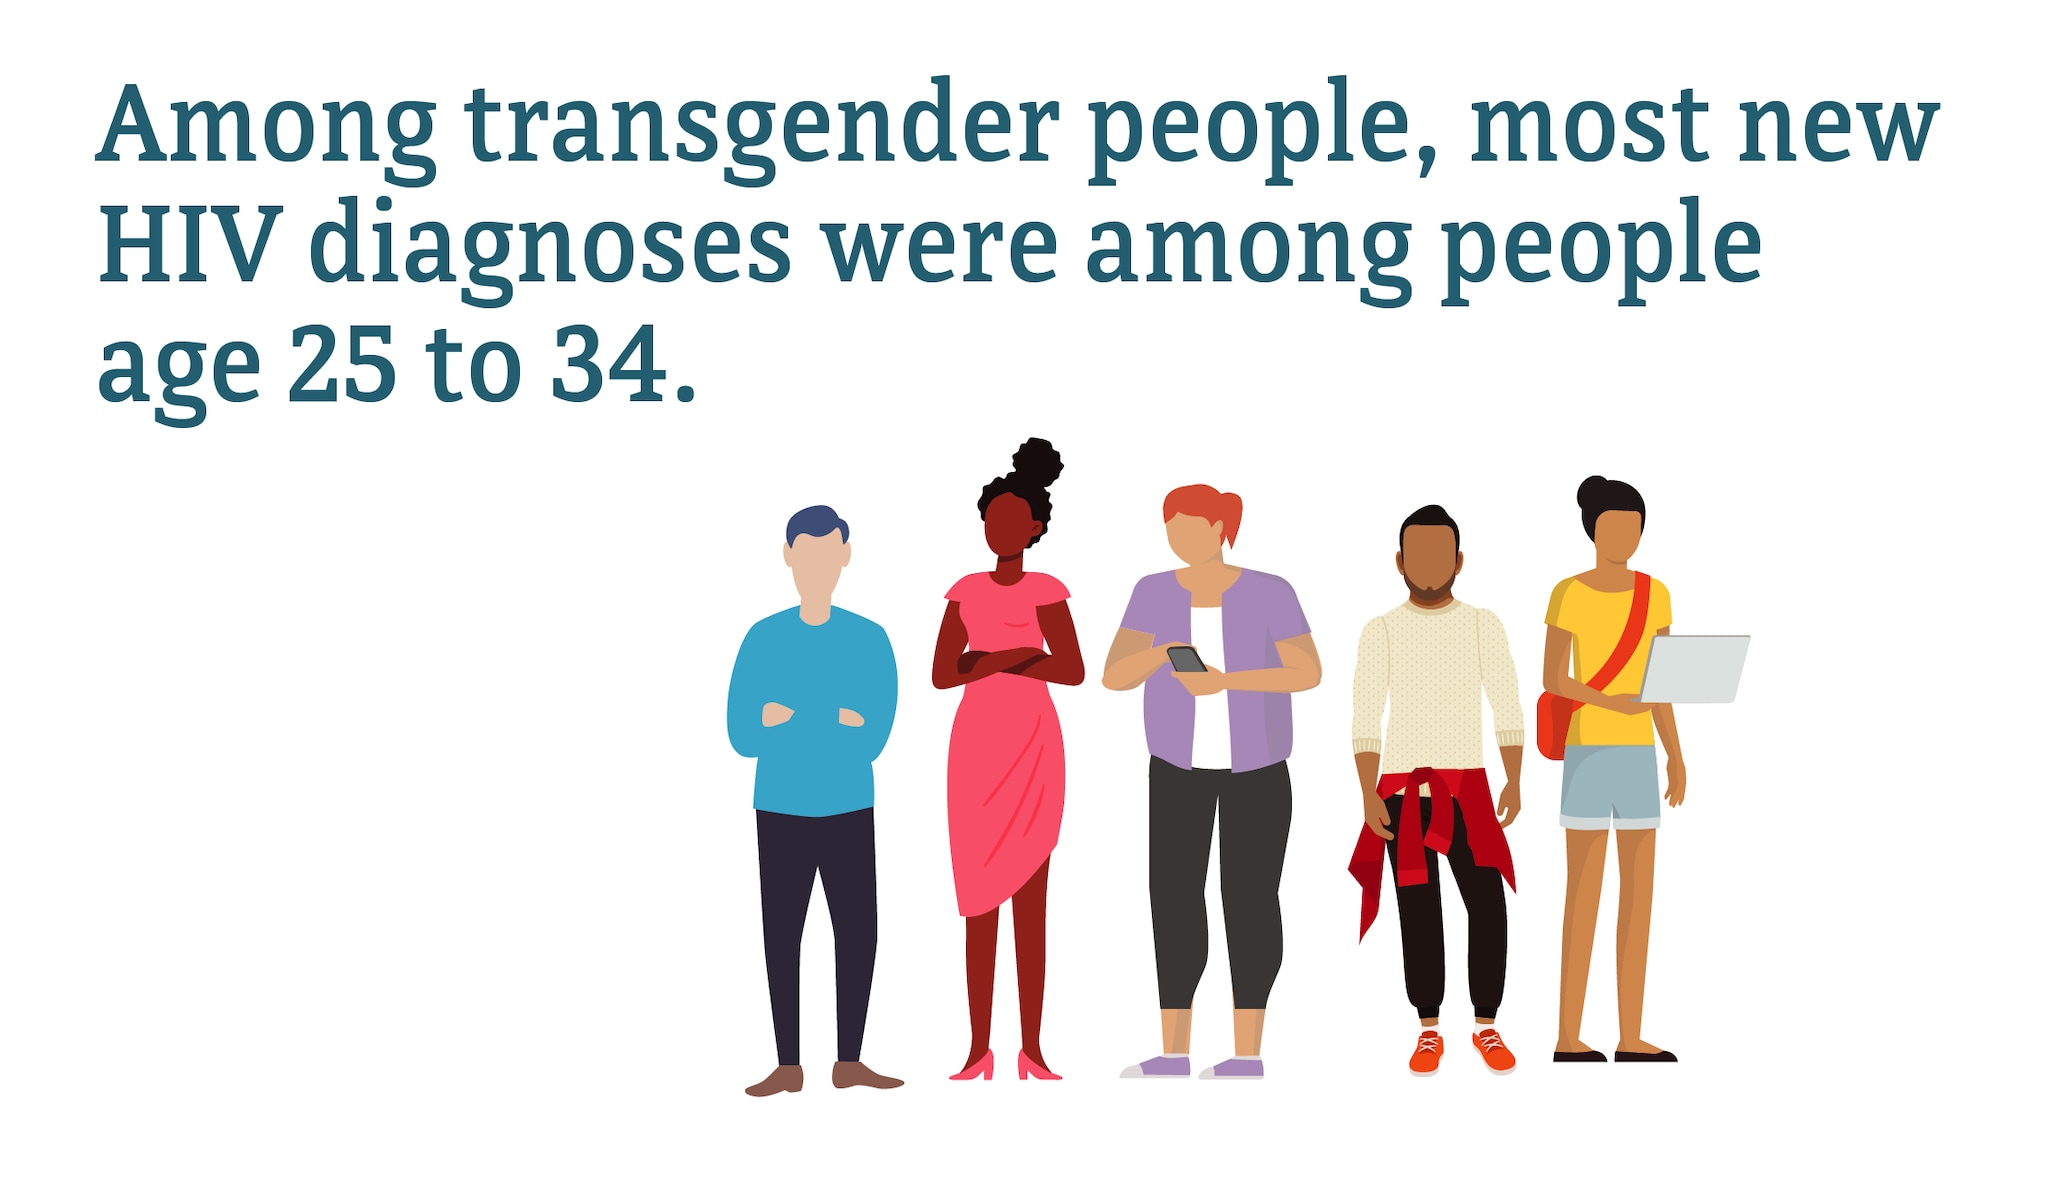 Among transgender people, most new HIV diagnoses were among people aged 25 to 34.